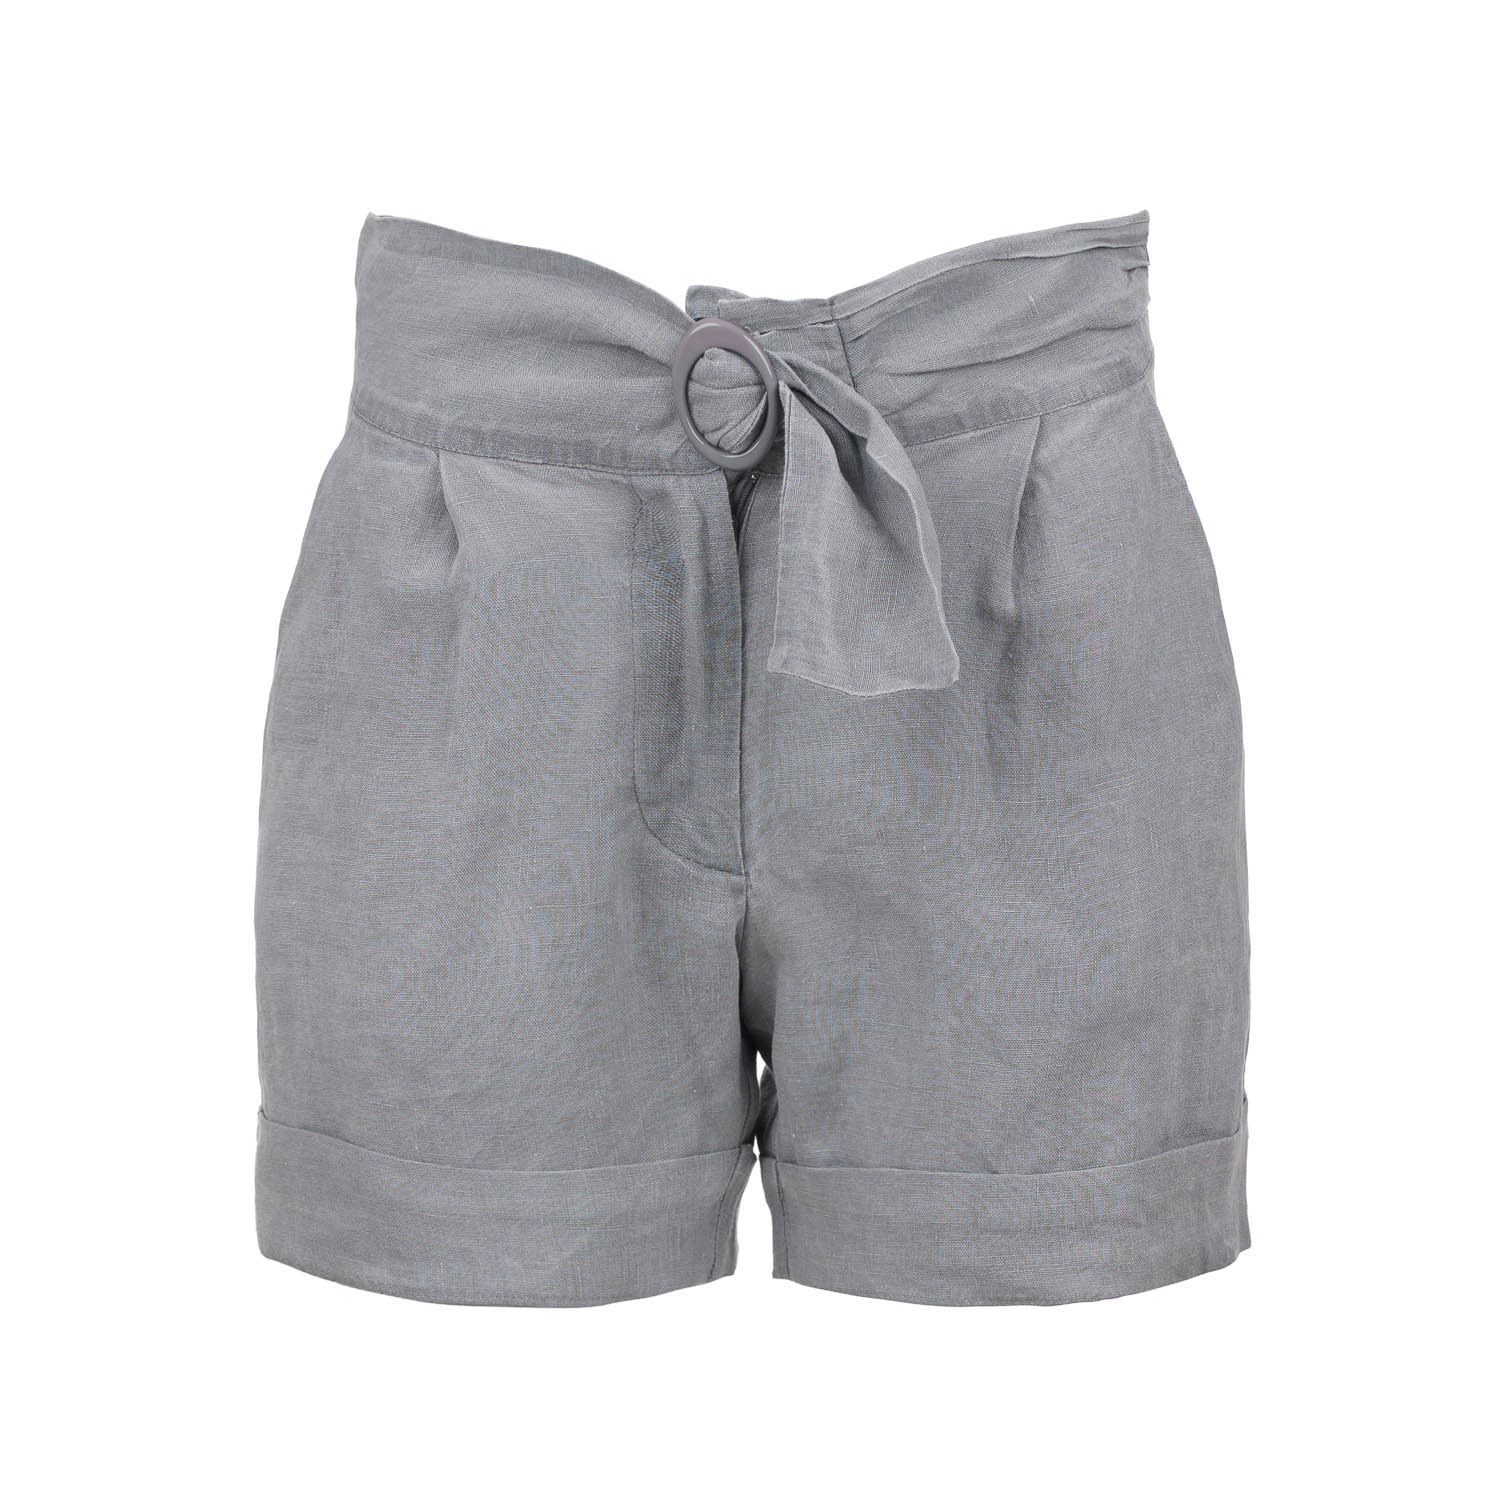 Women's Grey Organic Linen Shorts With Faux Belt Detail Extra Small Conquista